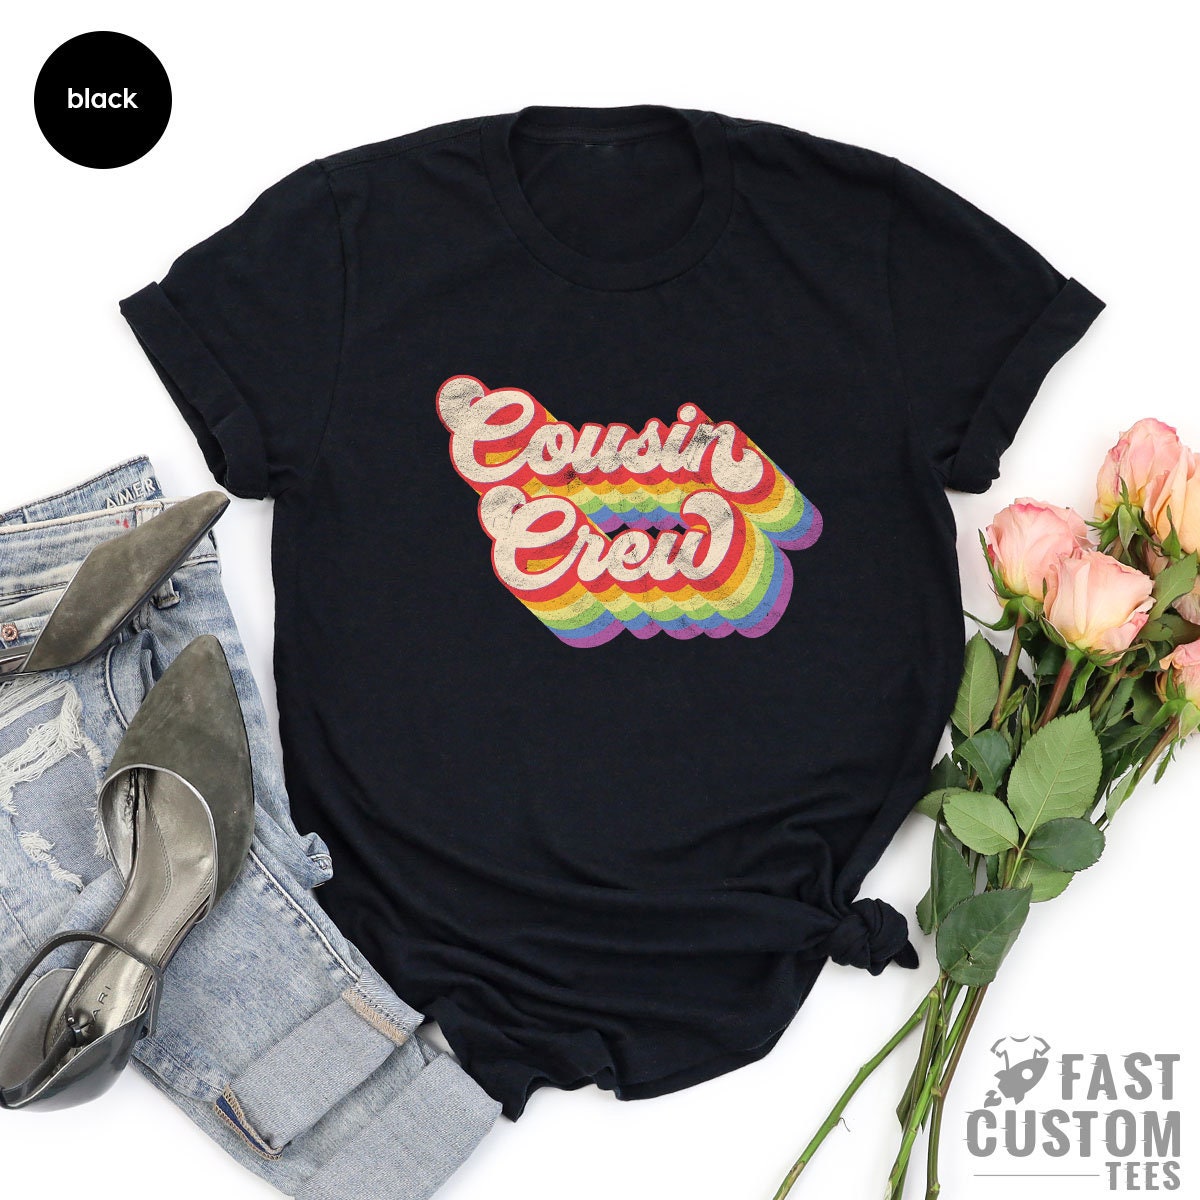 Cousin Crew Shirts, Matching Family Shirts, Family Cousin Gifts, Cousin T-Shirt, Cousin Tshirts, Funny Shirts For Family - Fastdeliverytees.com